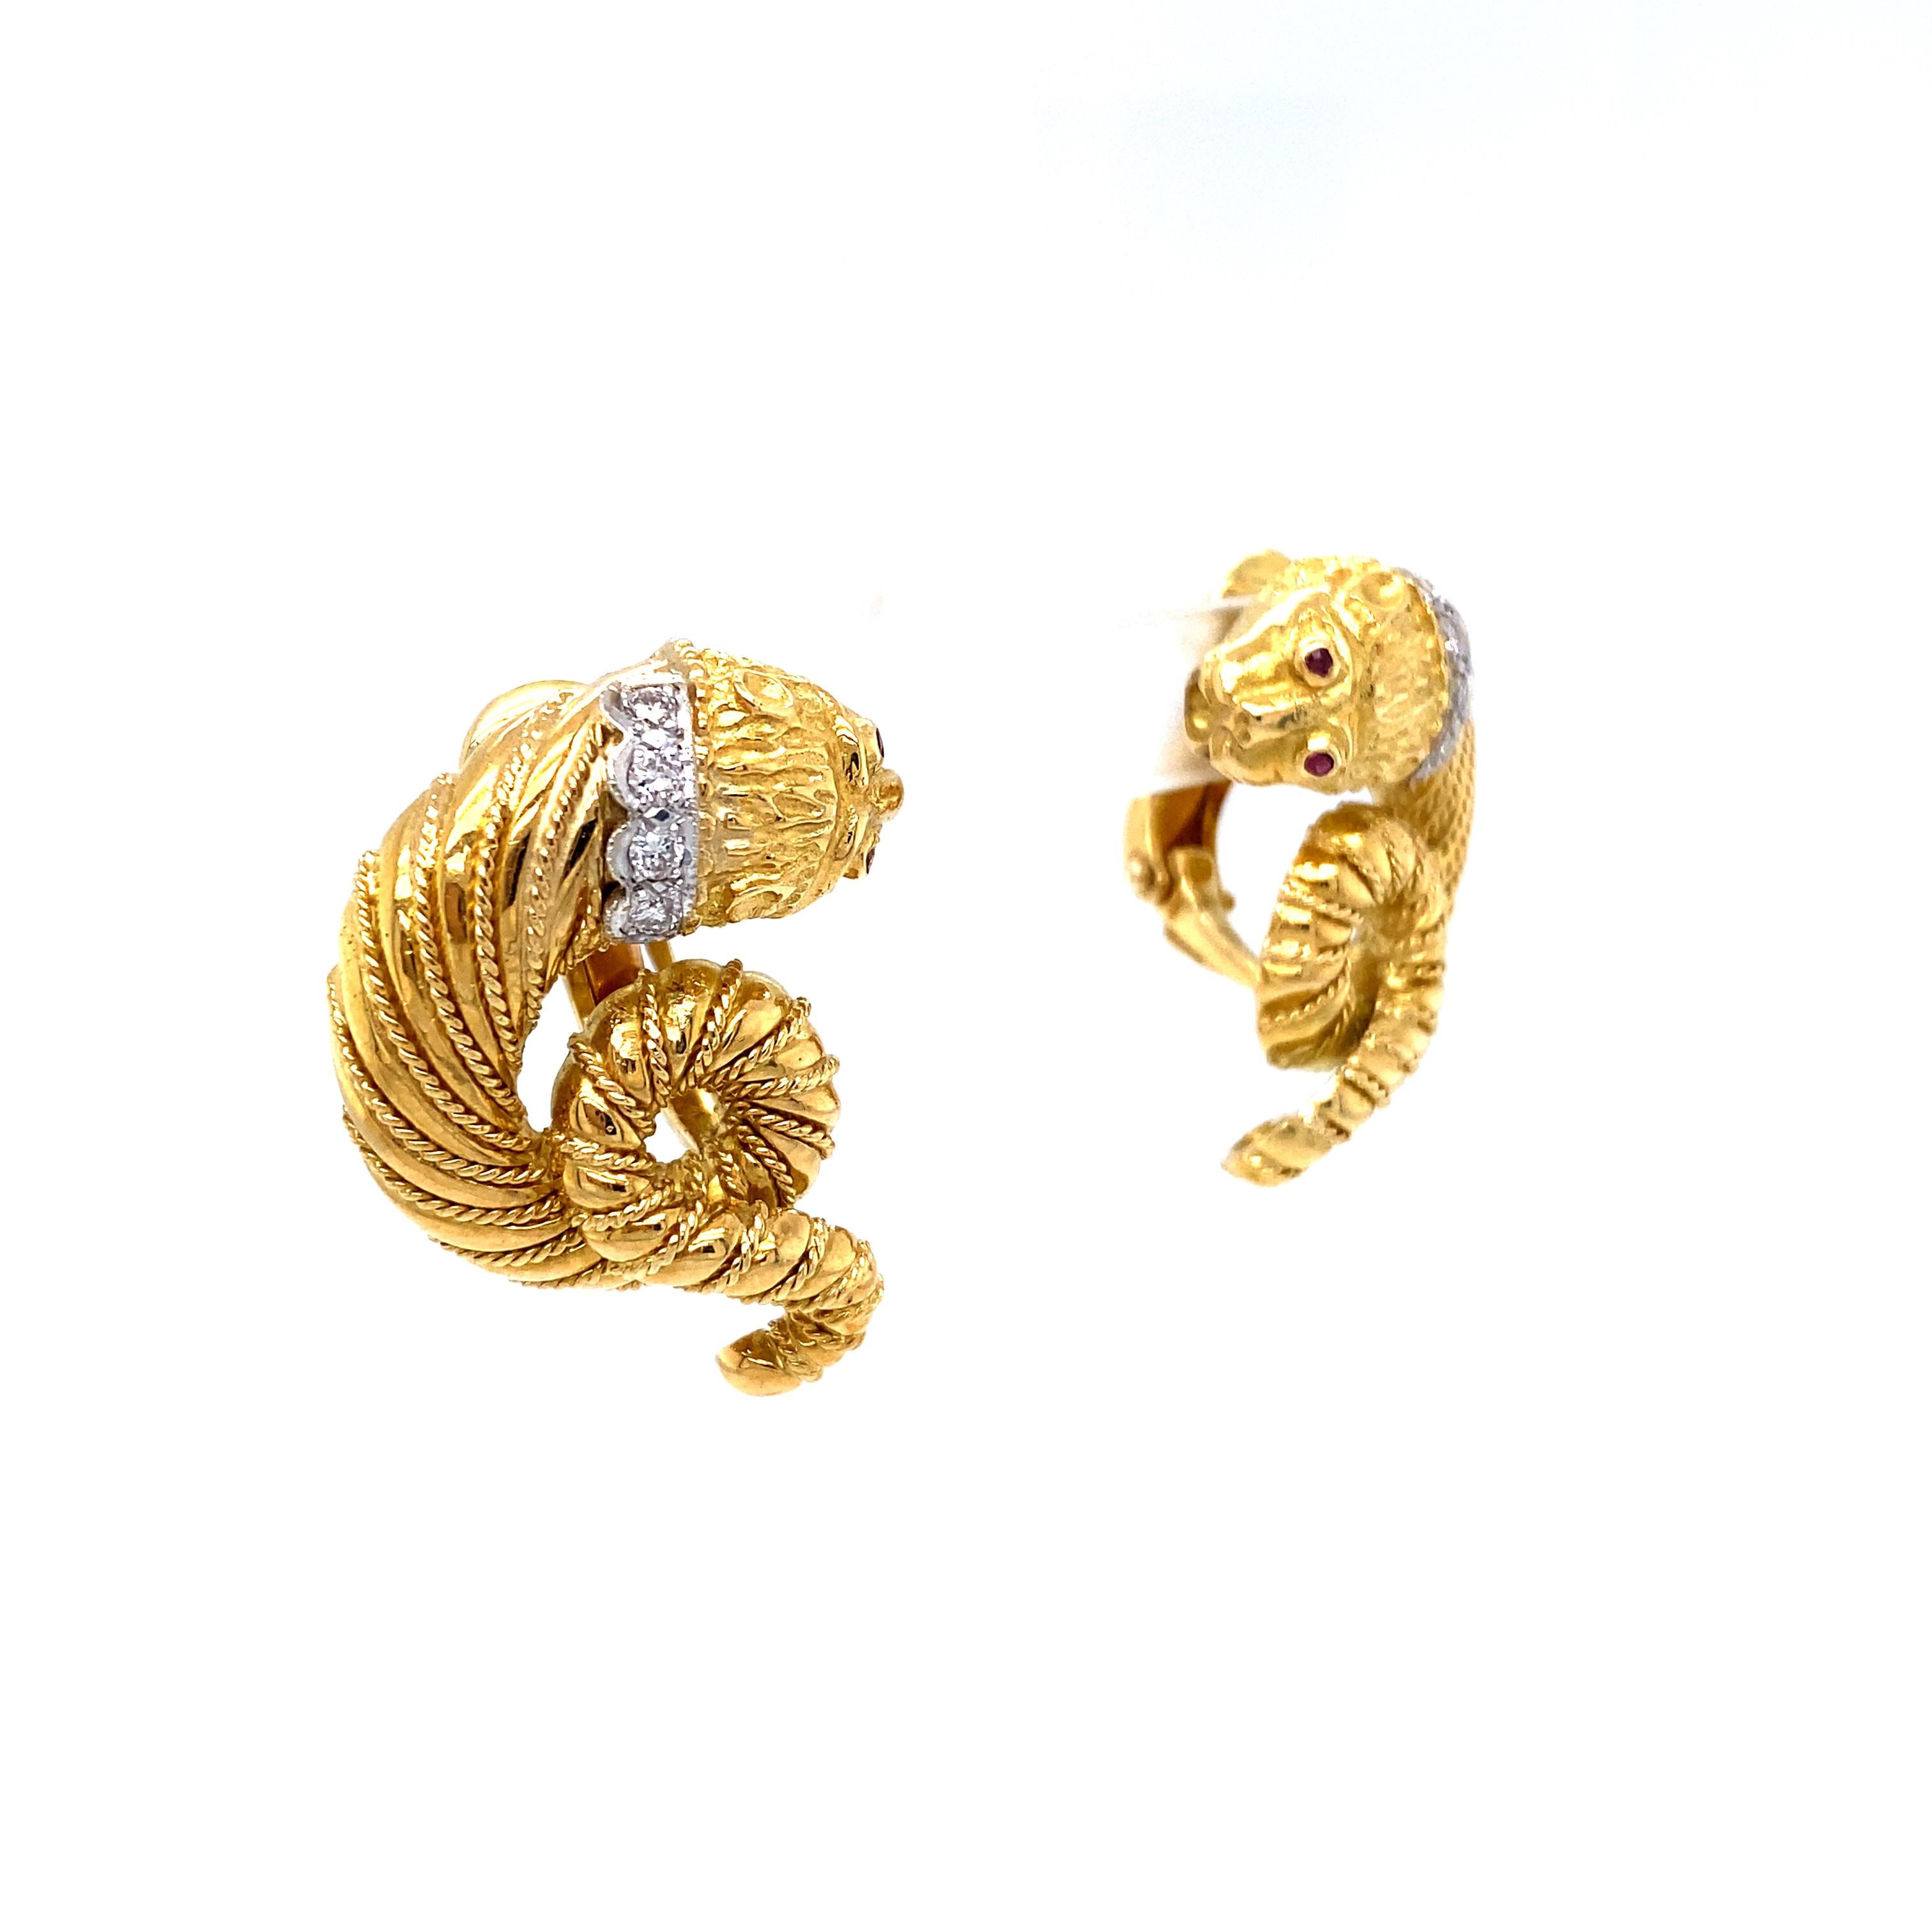 LOVE LOVE LOVE the expert craftsmanship of these Awesome Vintage Chinese Dragon 18K Yellow Gold Diamond and Ruby Earrings! Amazing statement earrings! Crafted in 18K Yellow Gold, each earring features a highly detailed Chinese Dragon, accented with